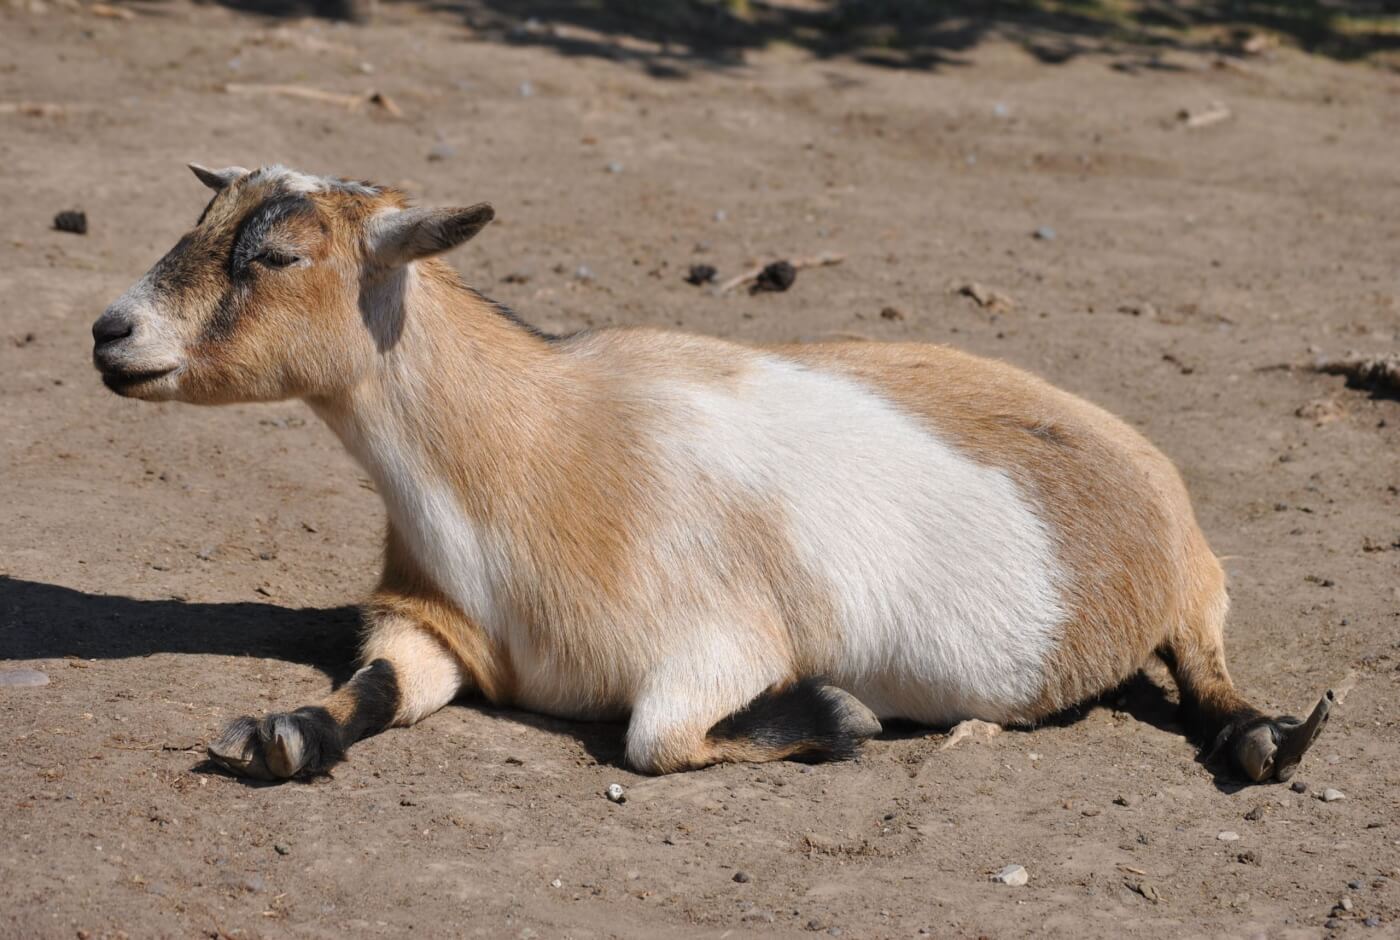 goat with overgrown hooves, lying down in a barren enclosure at a roadside zoo